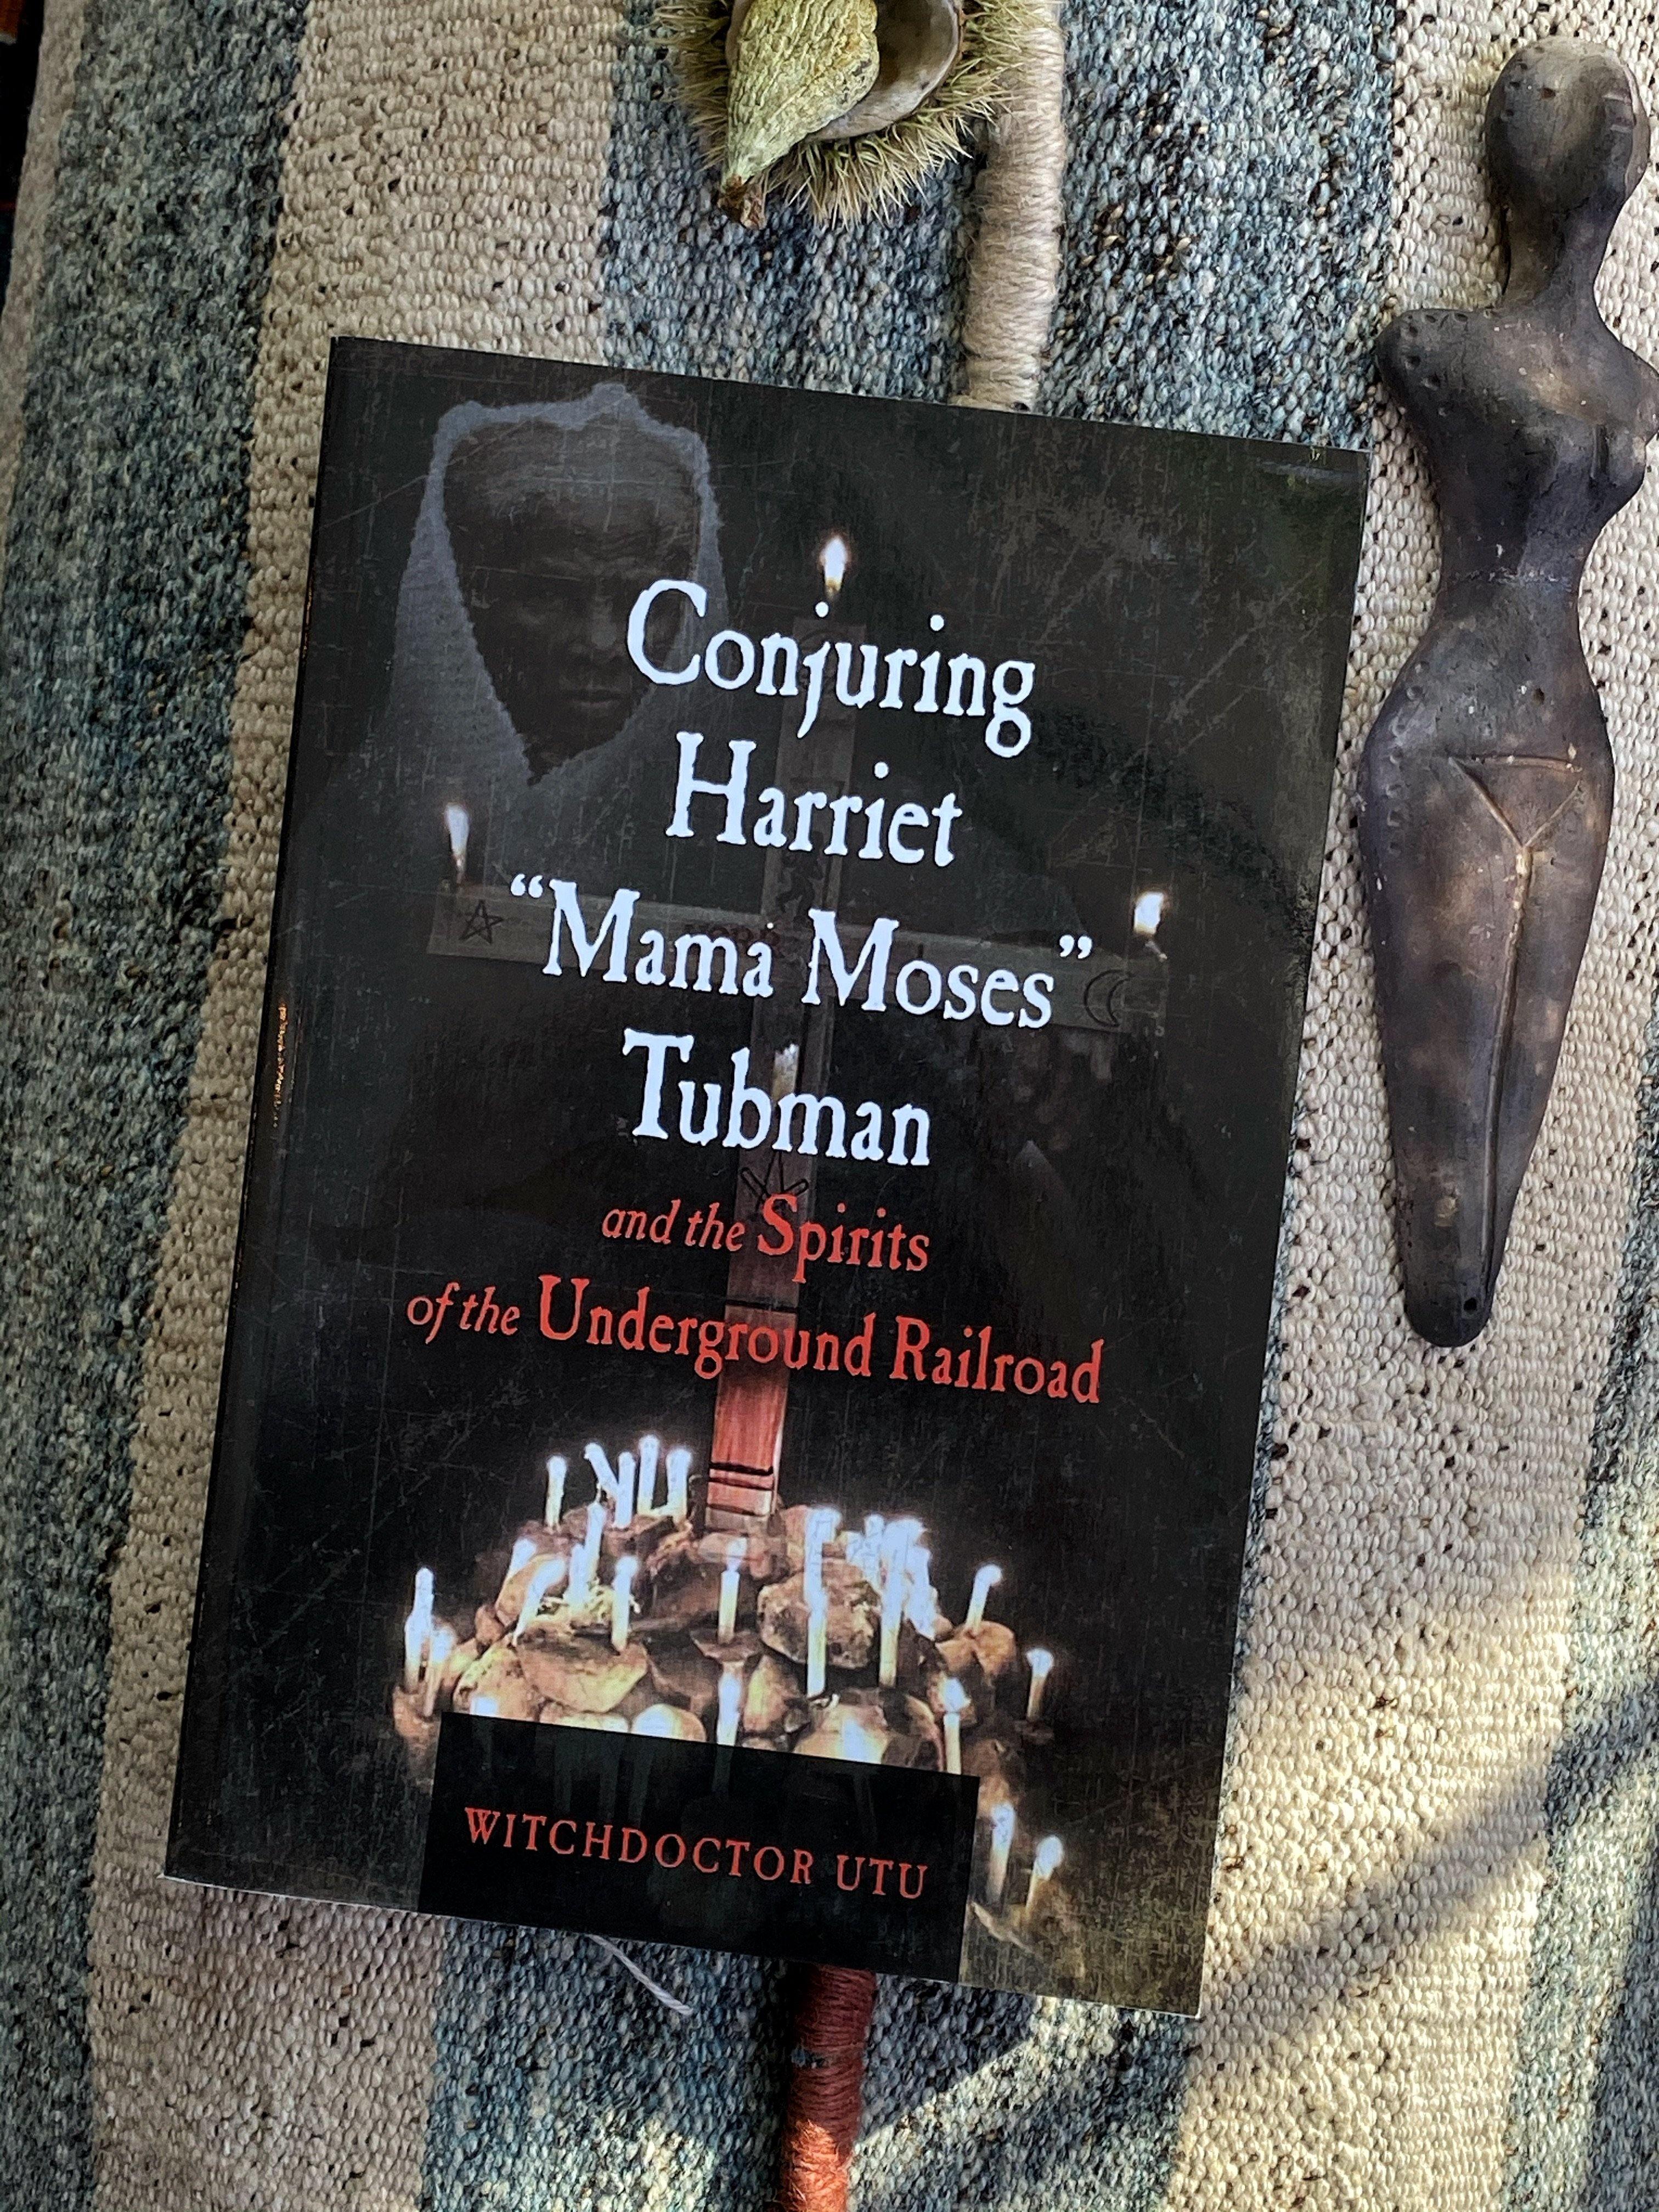 Conjuring Harriet "Mama Moses" Tubman and the Spirits of the Underground Railroad - Keven Craft Rituals